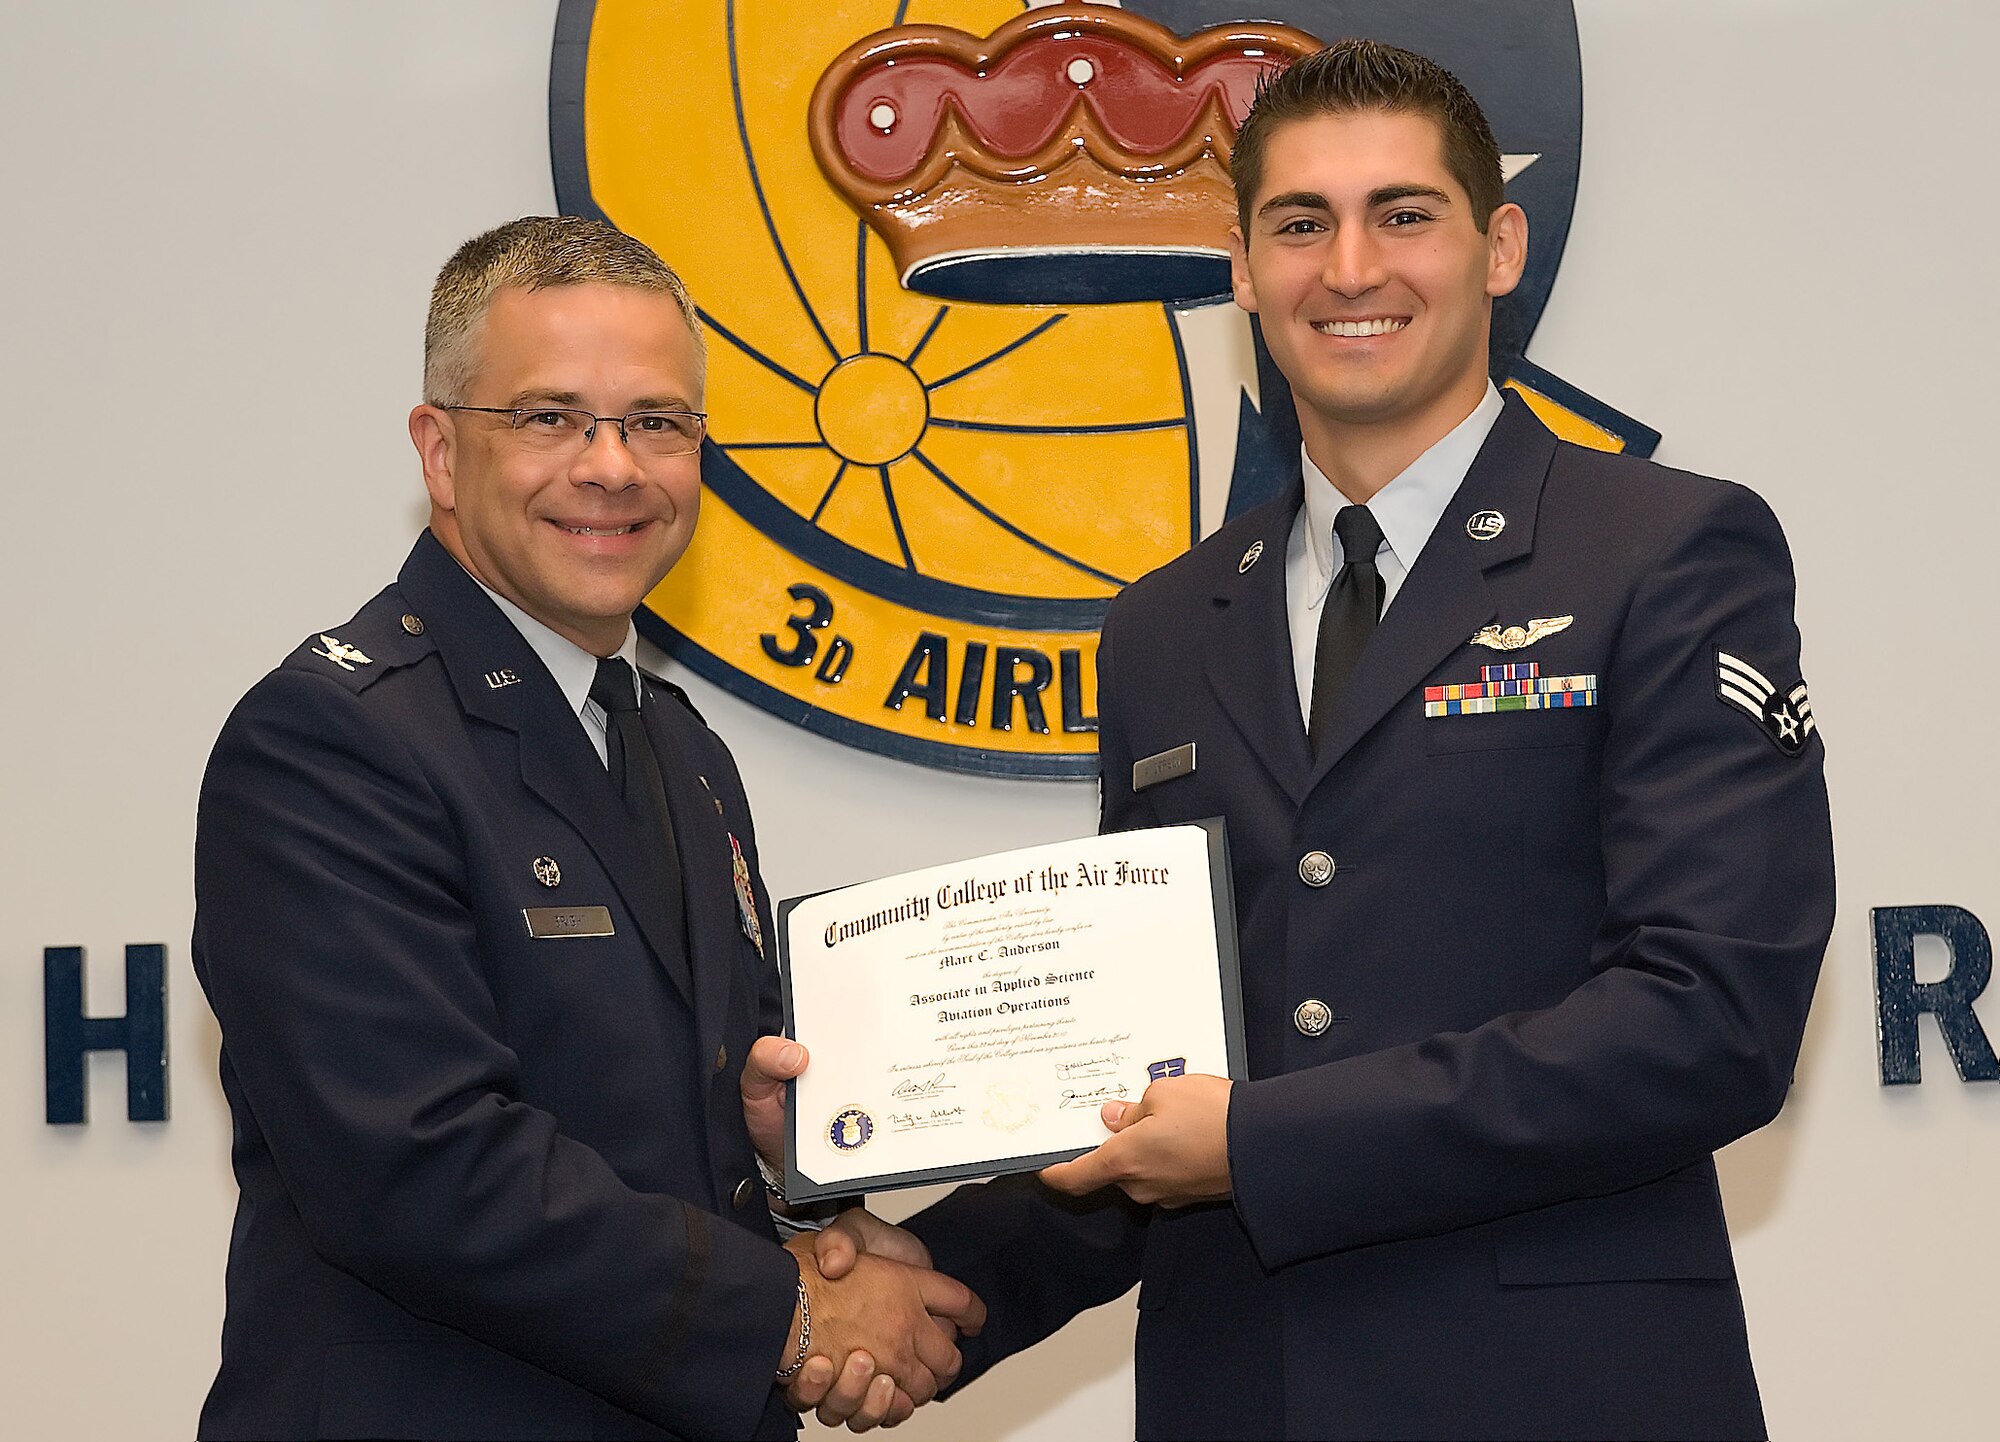 Col. Randal L. Bright, 512th Airlift Wing commander, presents Senior Airman Marc Anderson, 326th Airlift Squadron, with an associate in applied science degree June 12 during a Community College of the Air Force graduation ceremony on base. Airman Anderson is a loadmaster who received his degree in Aviation Operations. (U.S. Air Force photo by Steve Kotecki/Released)